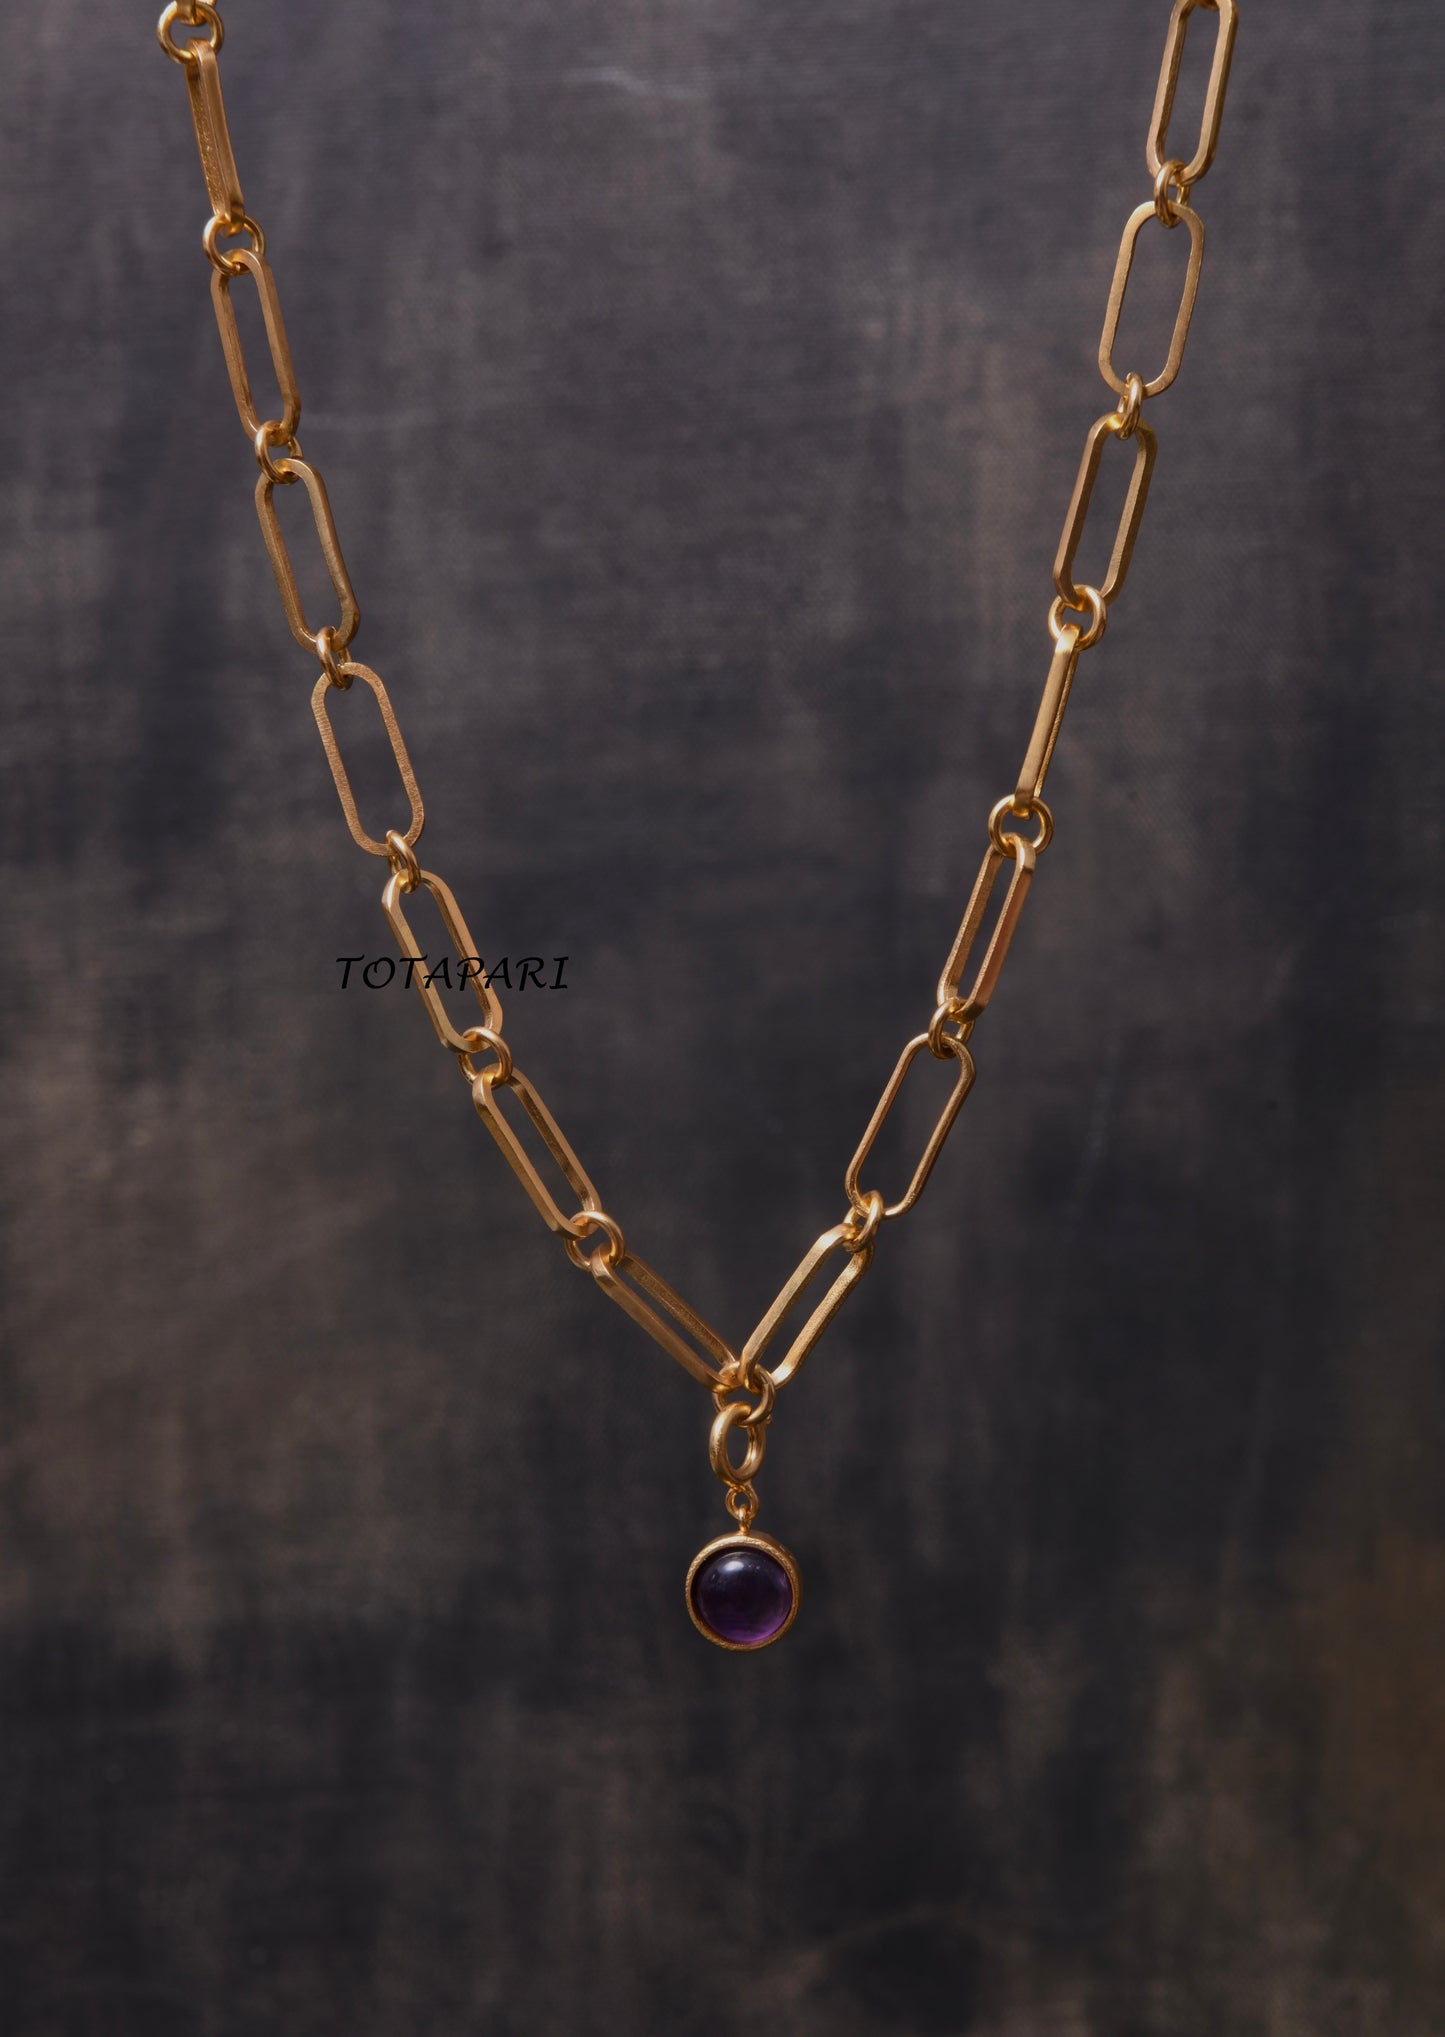 Crown Chakra Linked Necklace